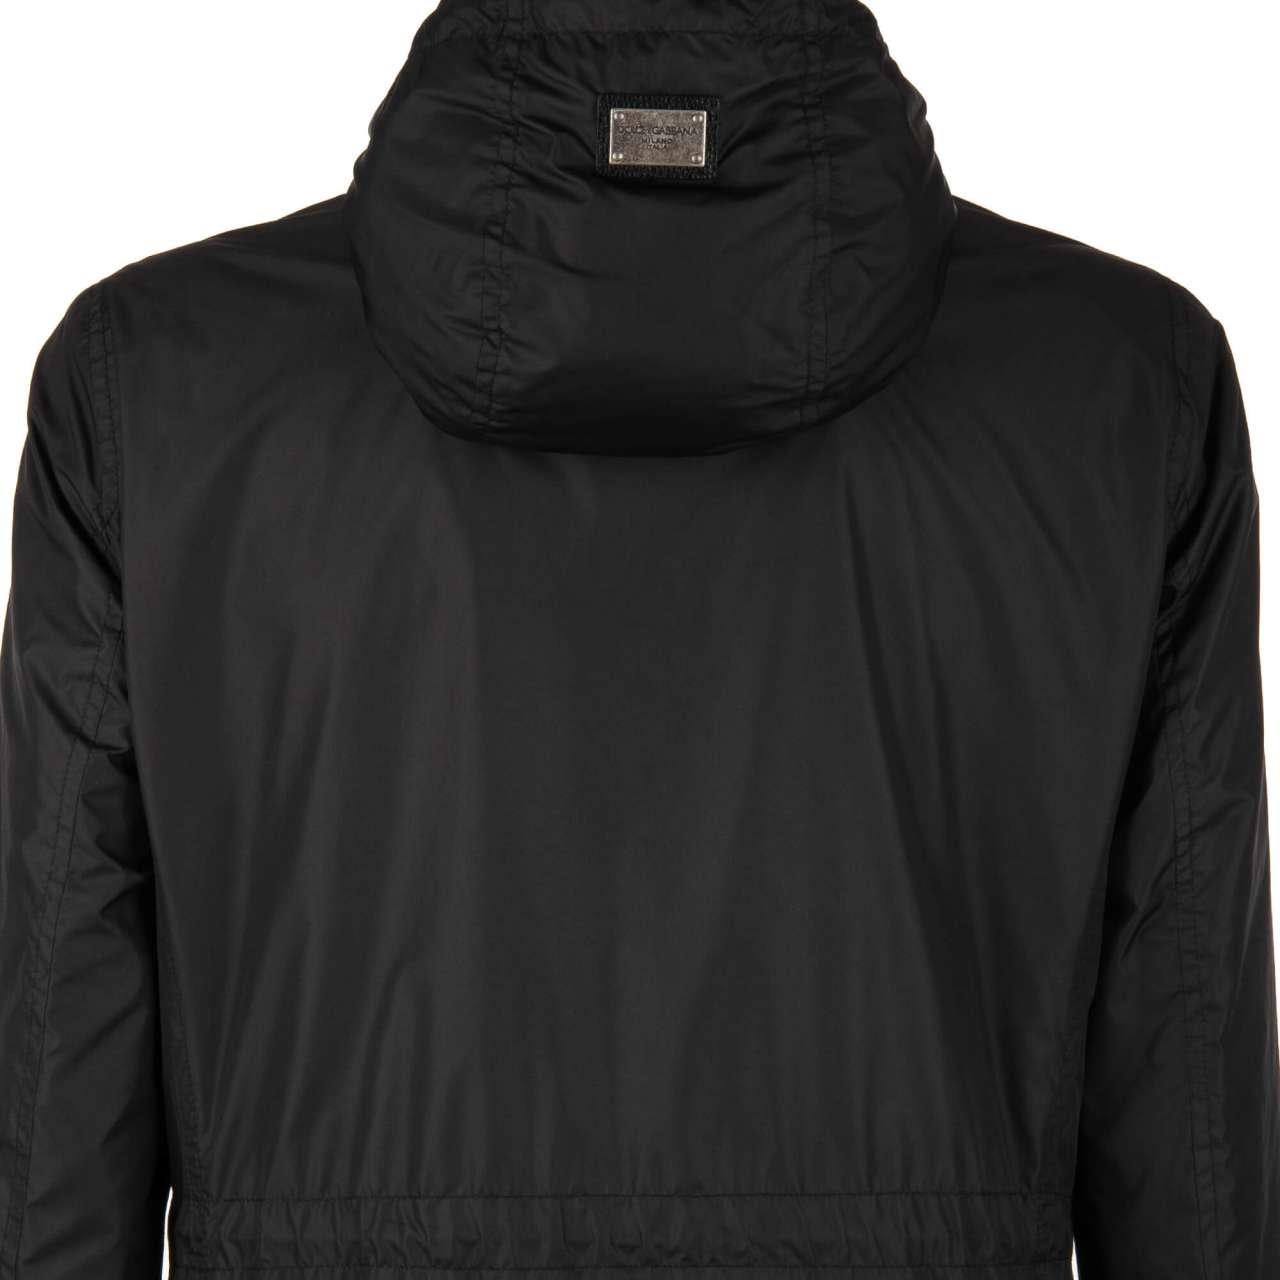 Dolce & Gabbana Classic Rain Parka Jacket with Pockets and Hoody Black 54 For Sale 1